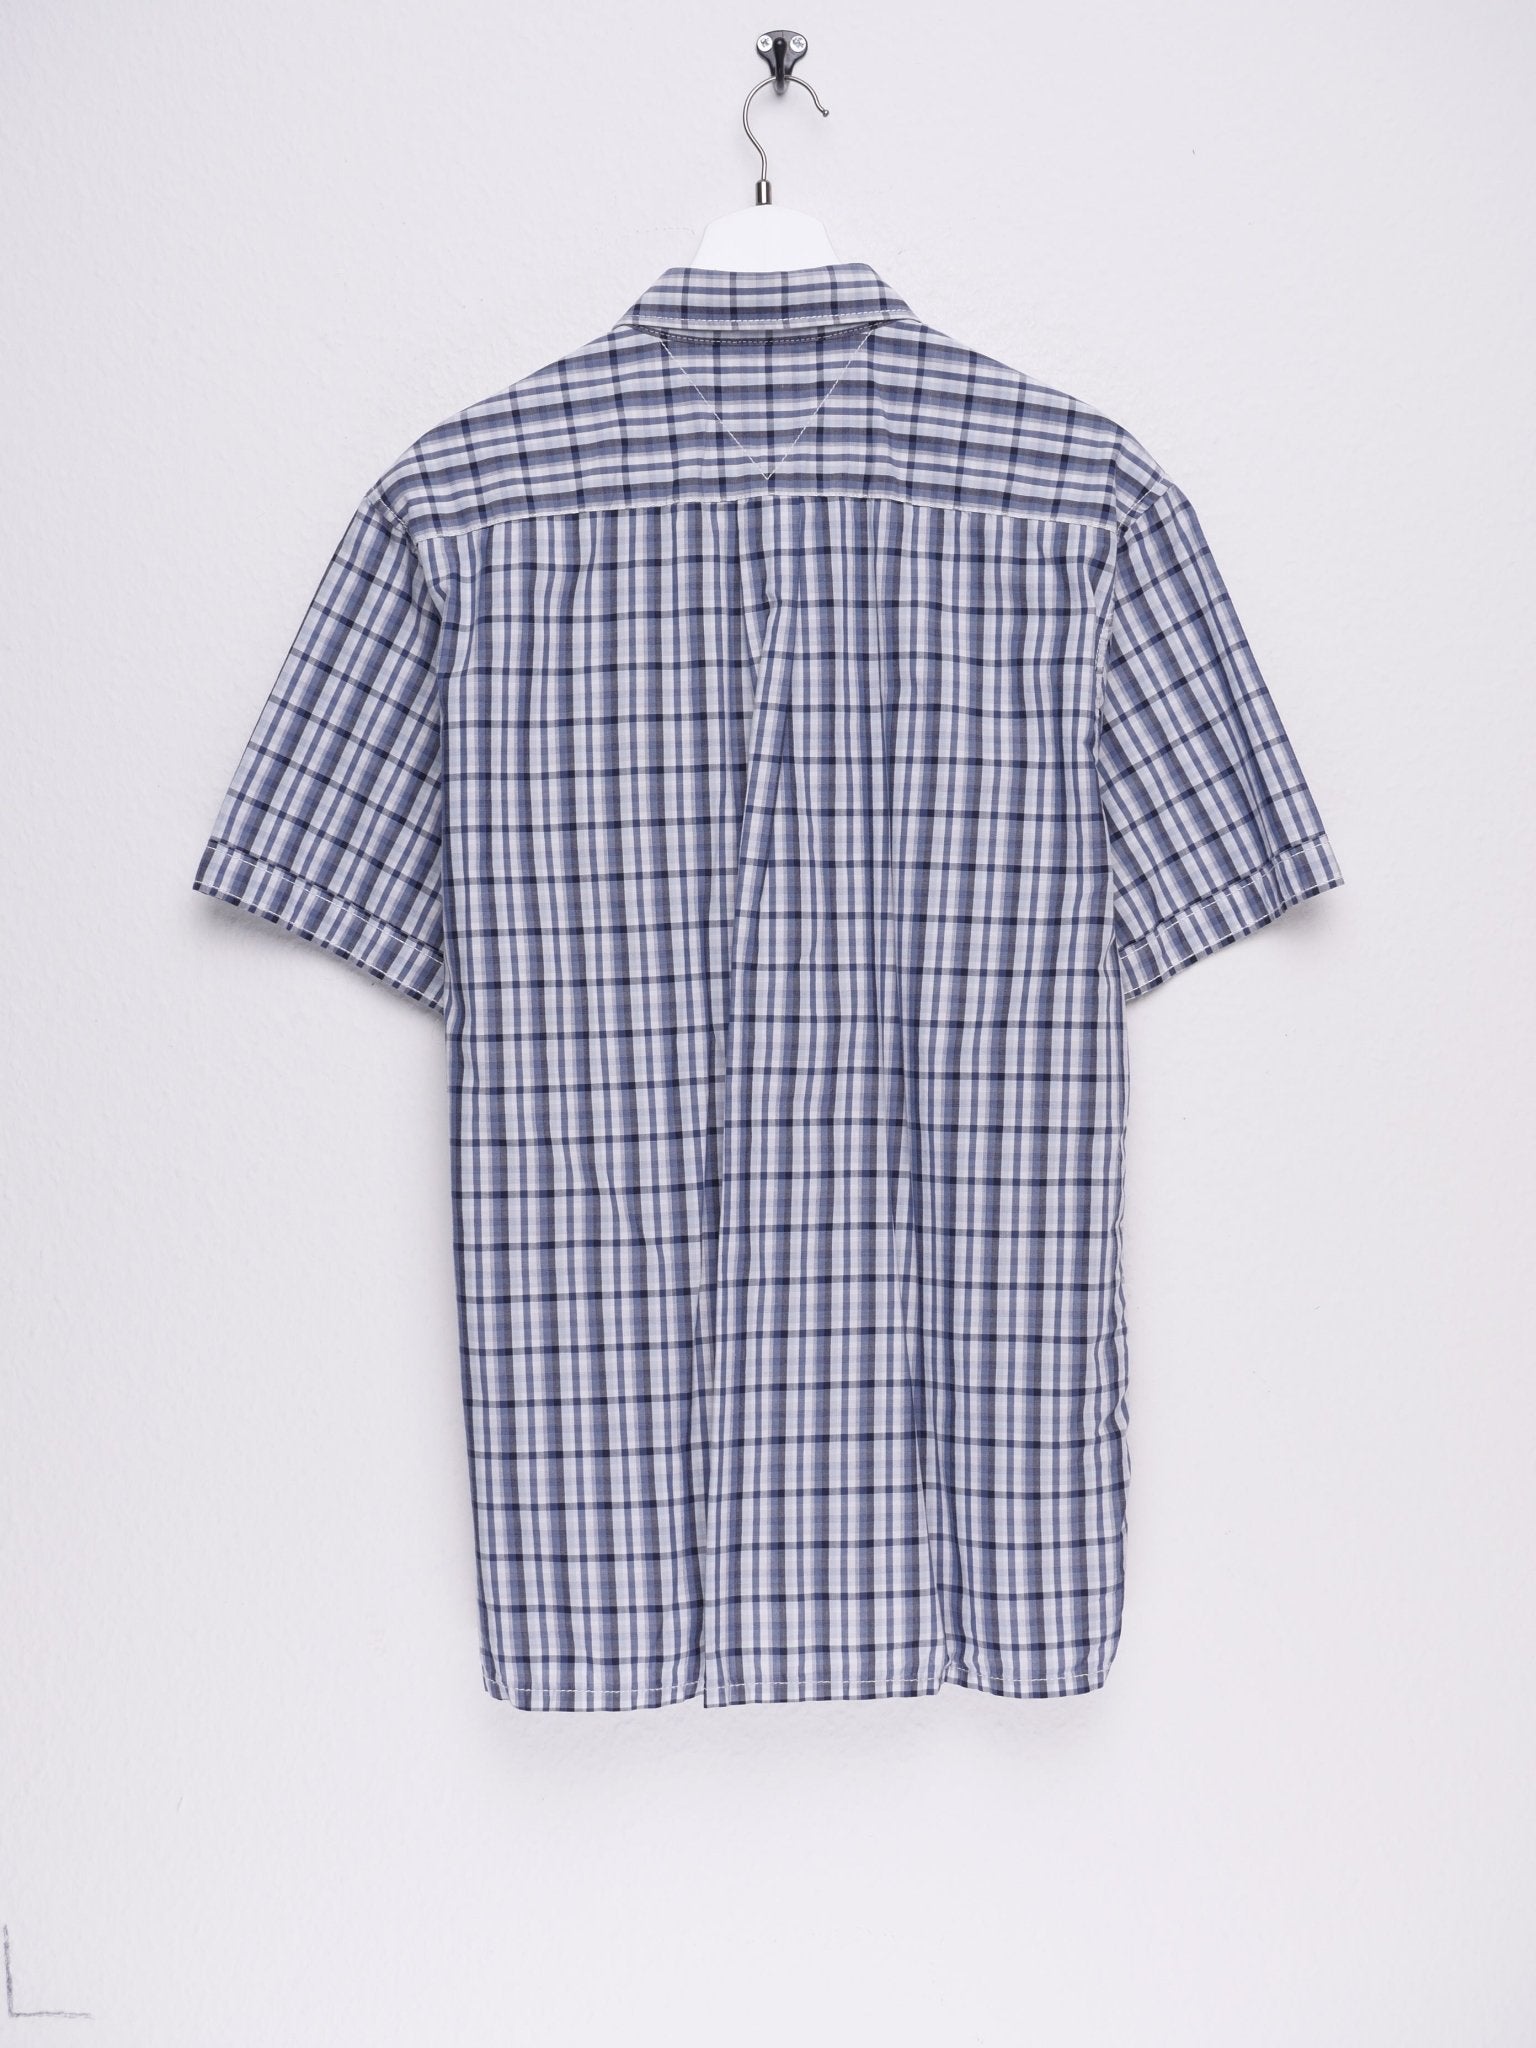 Tommy Hilfiger embroidered Logo checkered S/S Button Down - Peeces